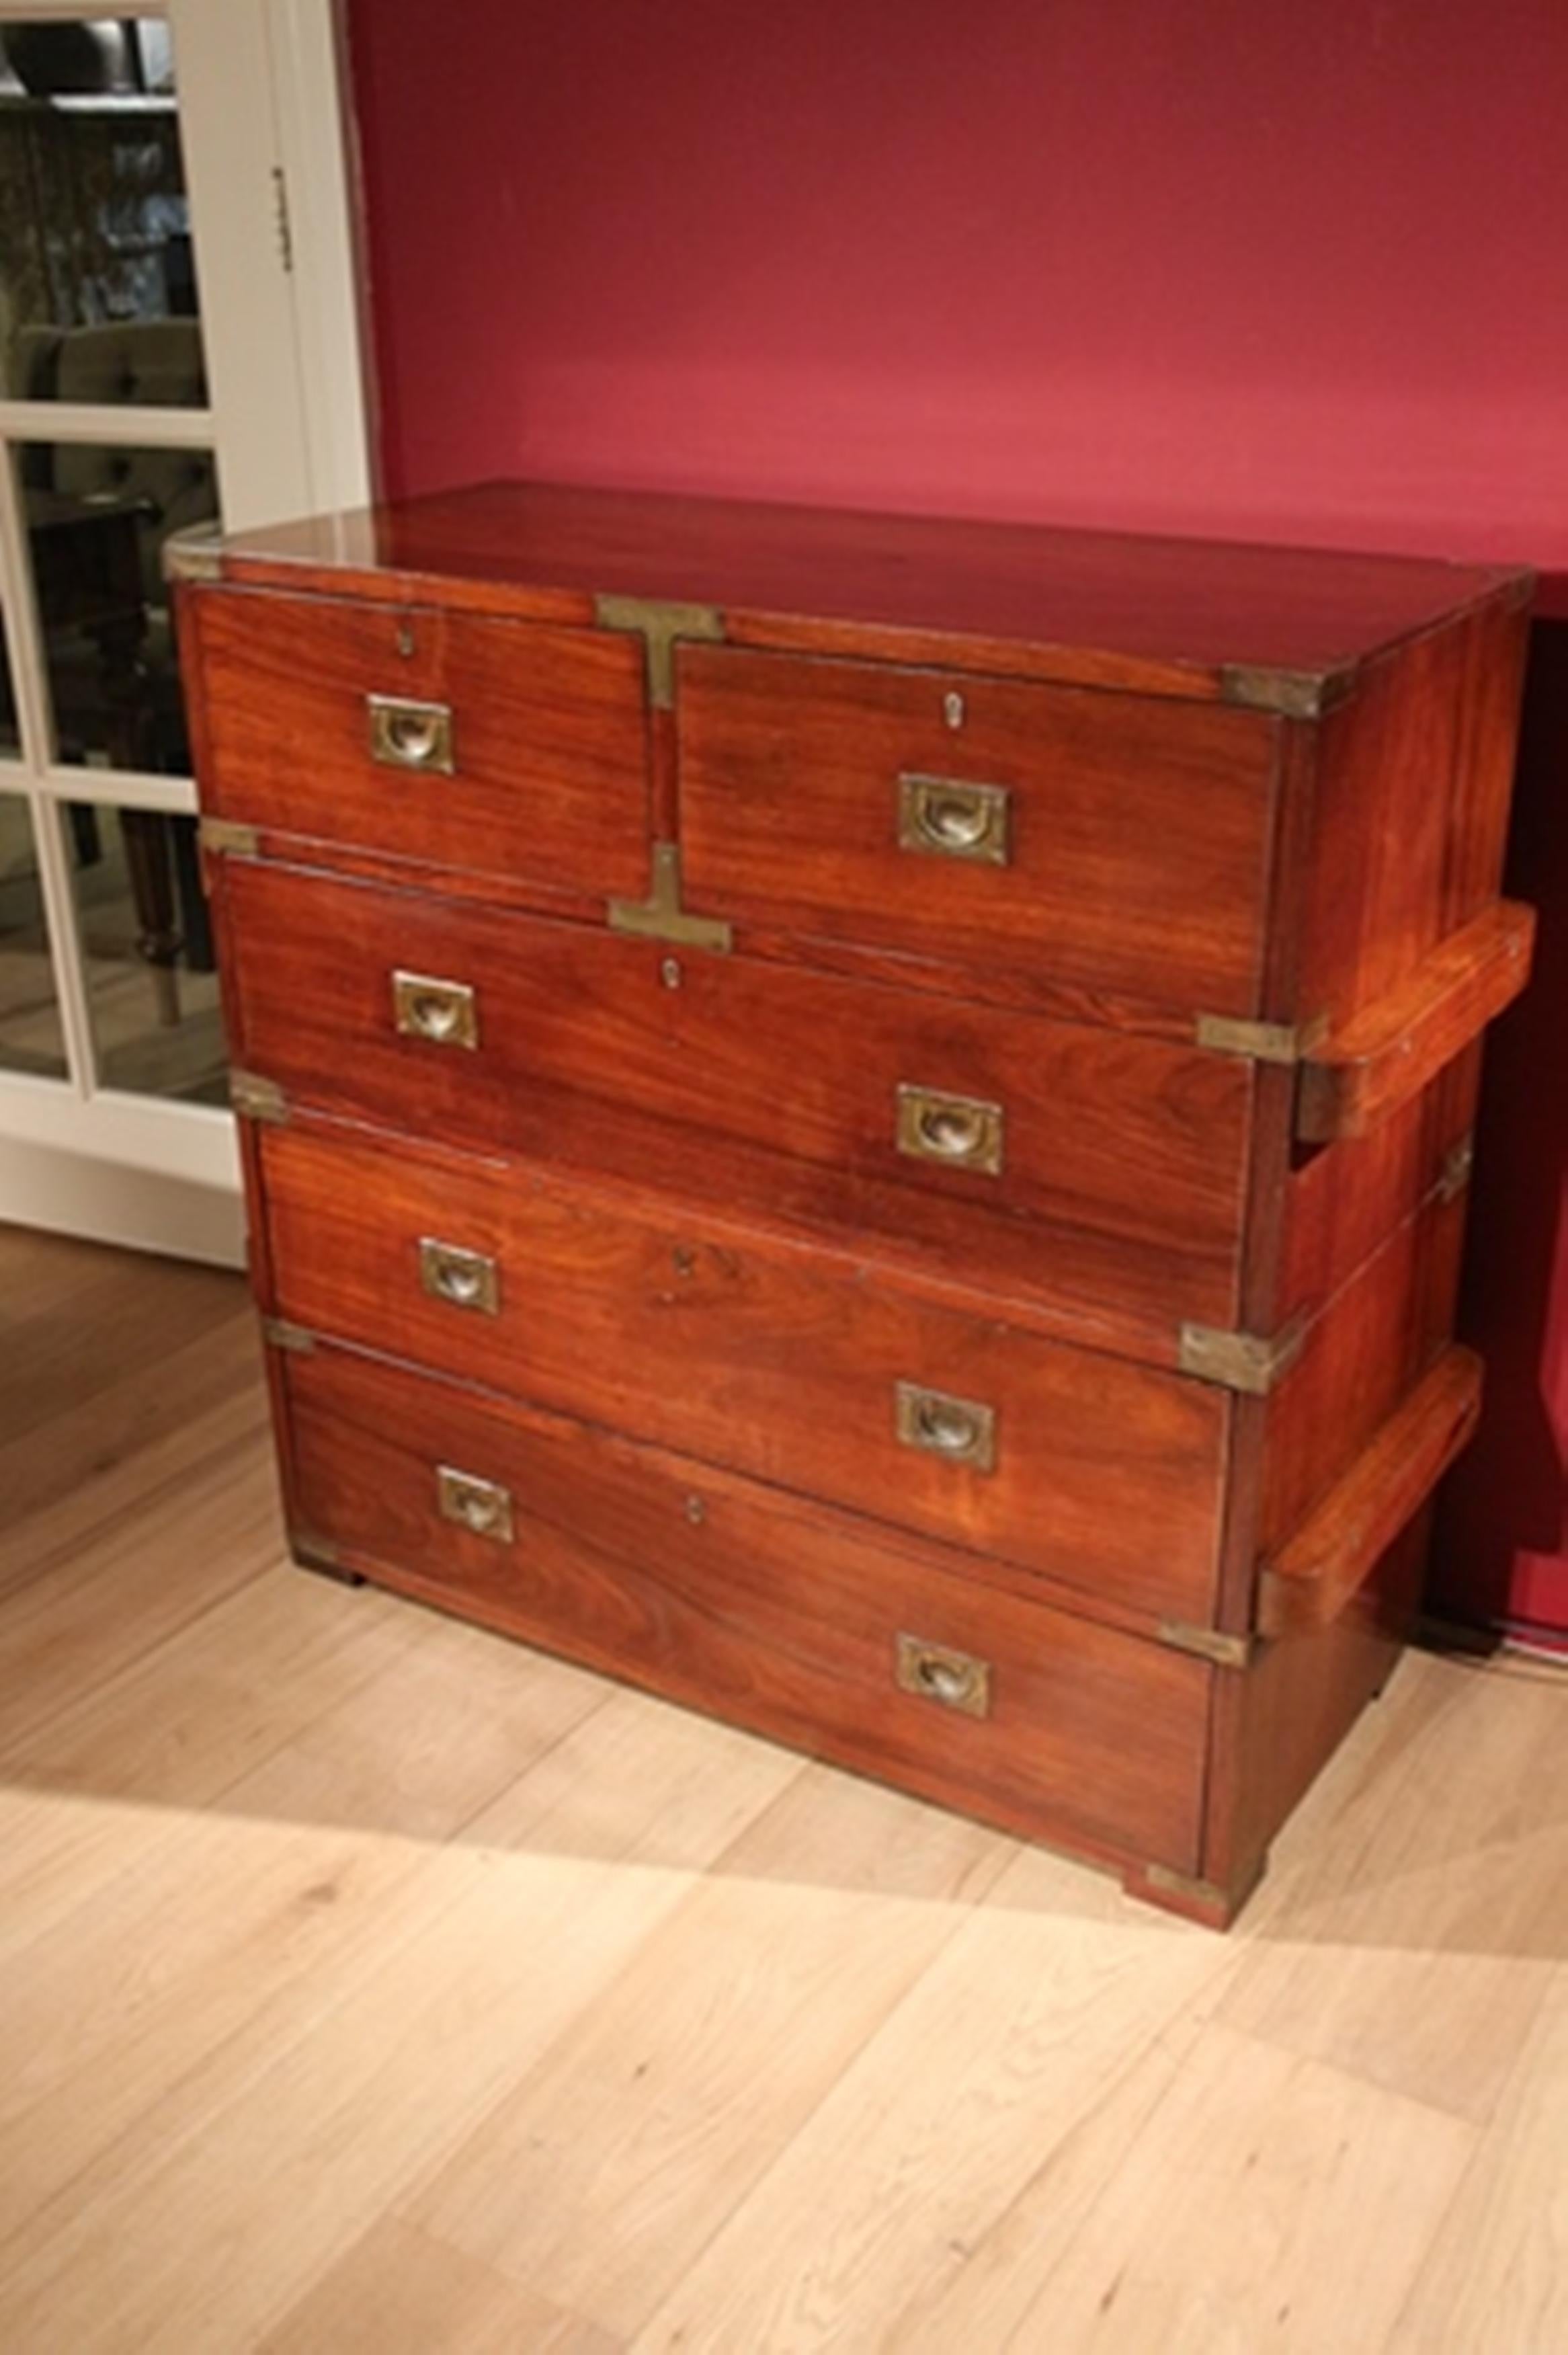 Here we have a fine small military chest. The chest is made in two sections for the ease of transportation, either by sea or pack horse and mule.
This particular chest would have been made for an officer for Campaign.
The chest of drawers has the